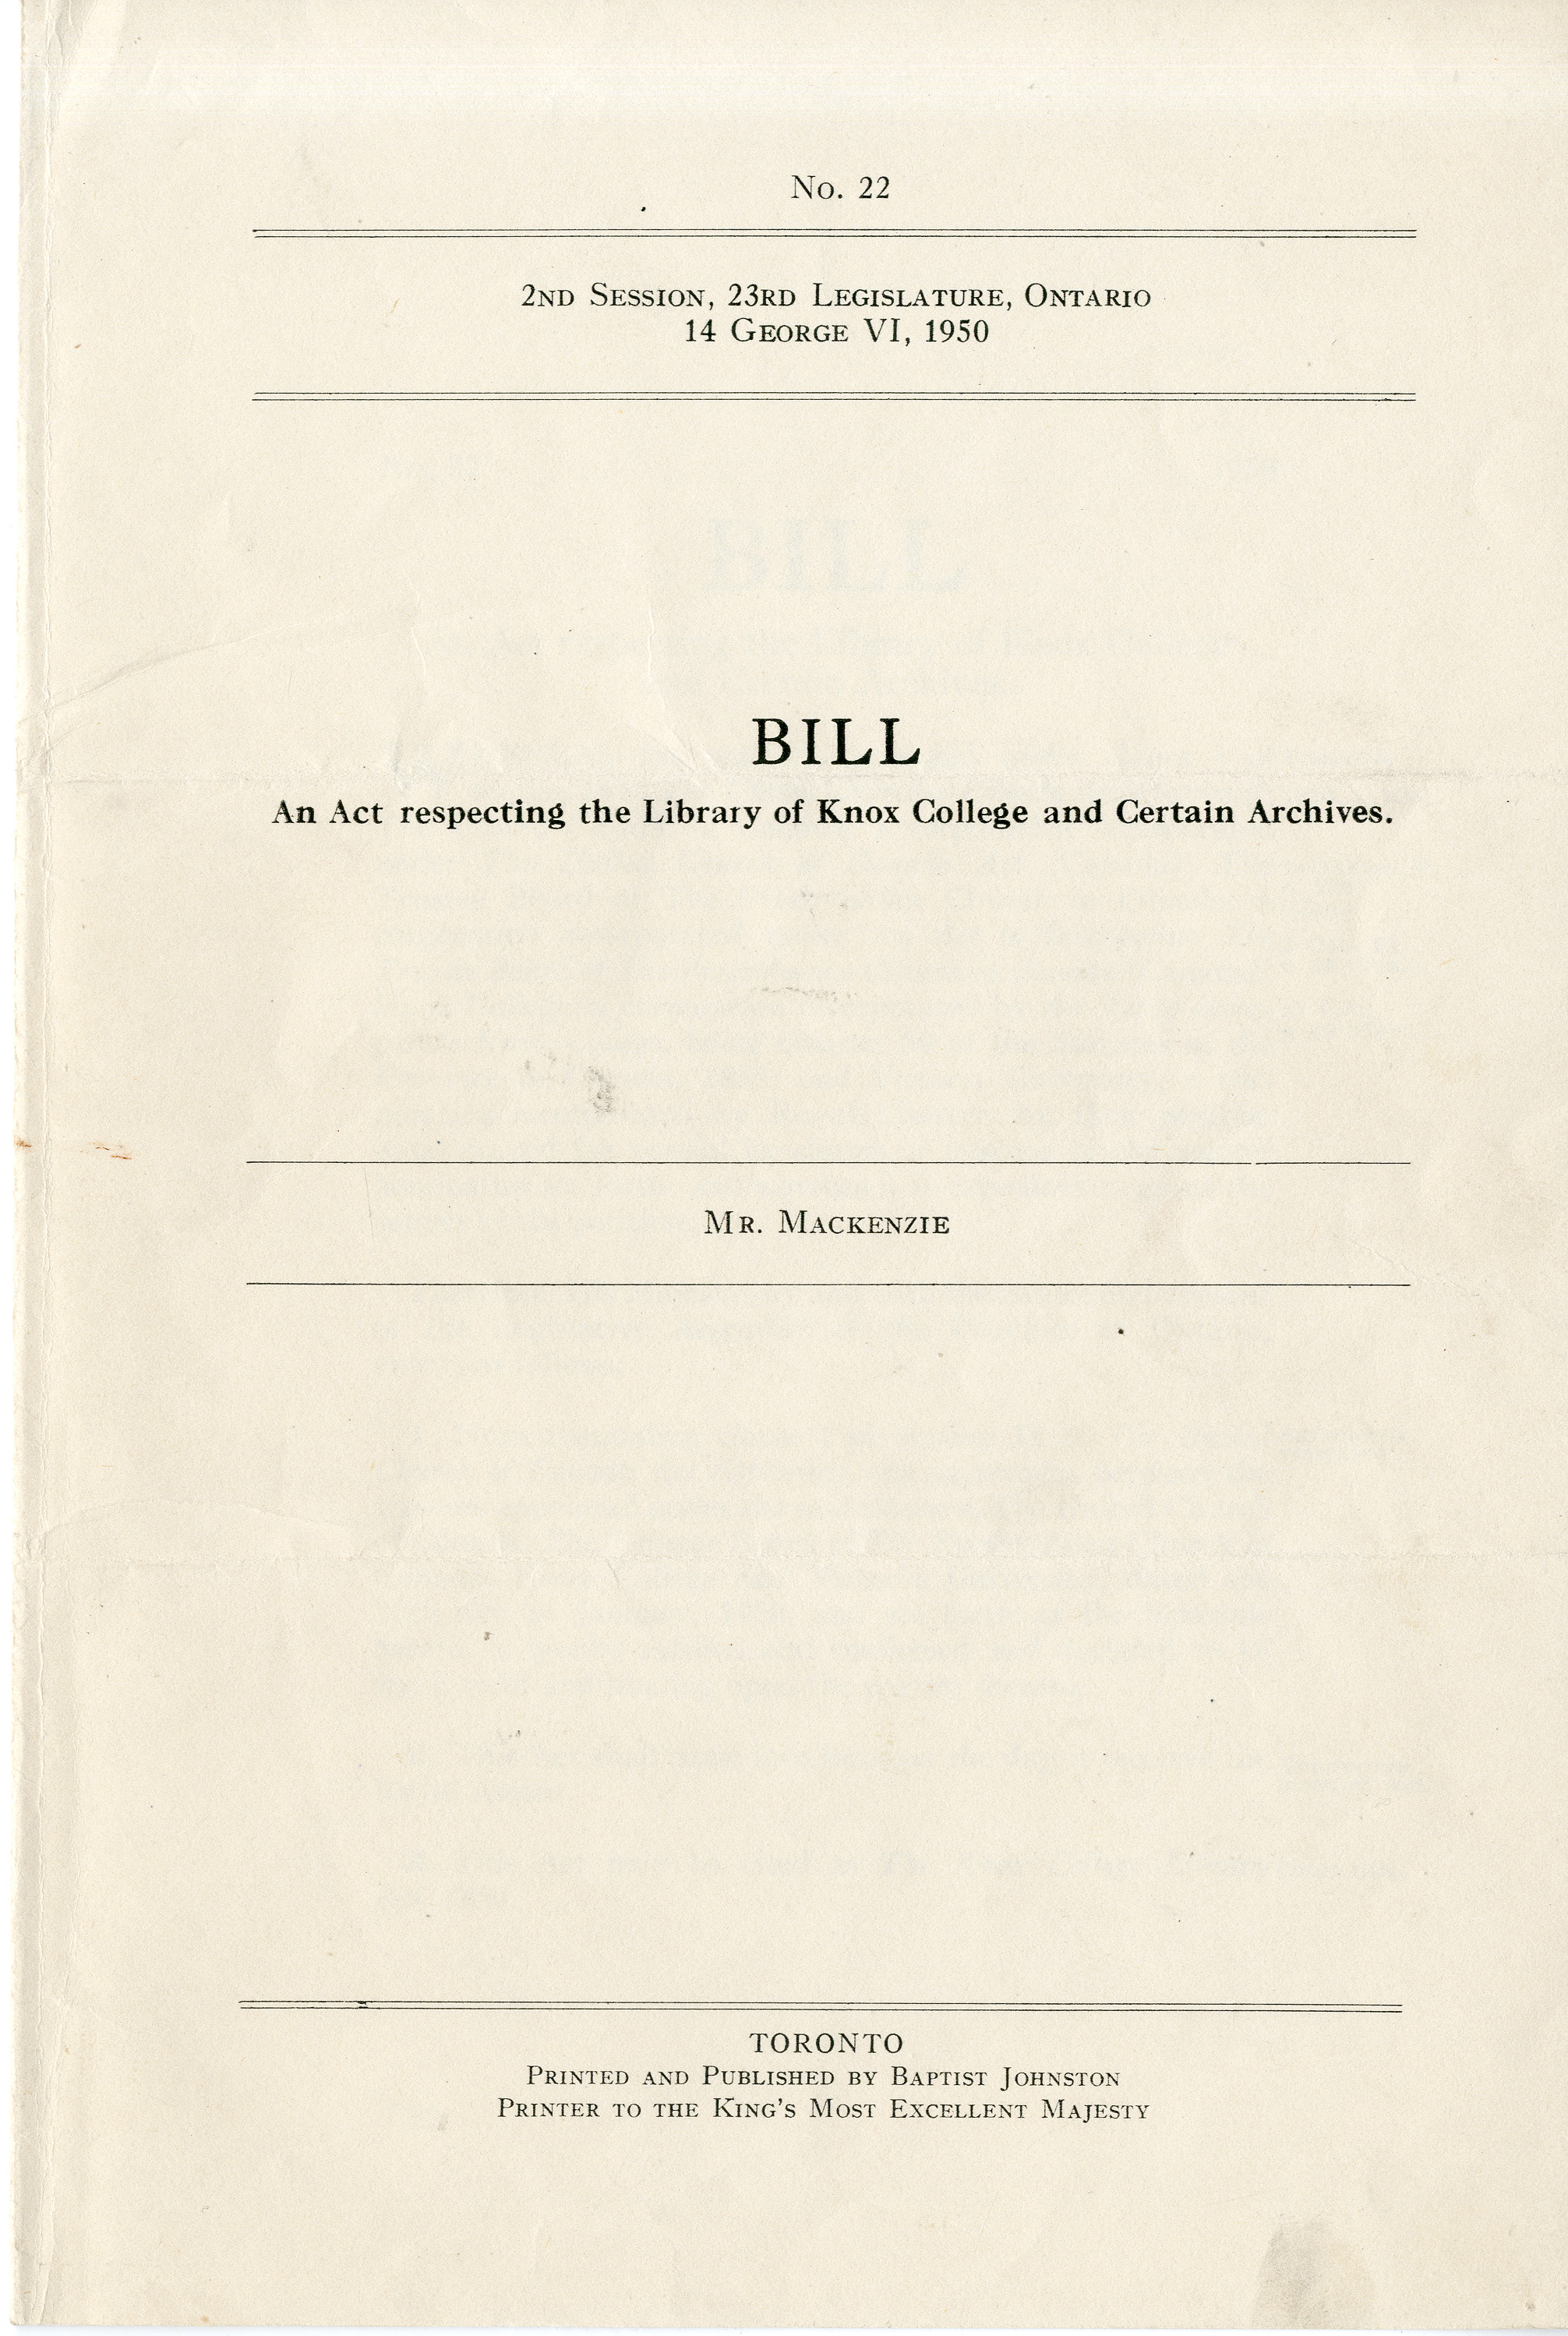 The 1950 Bill awarding the Caven Library back to Knox College